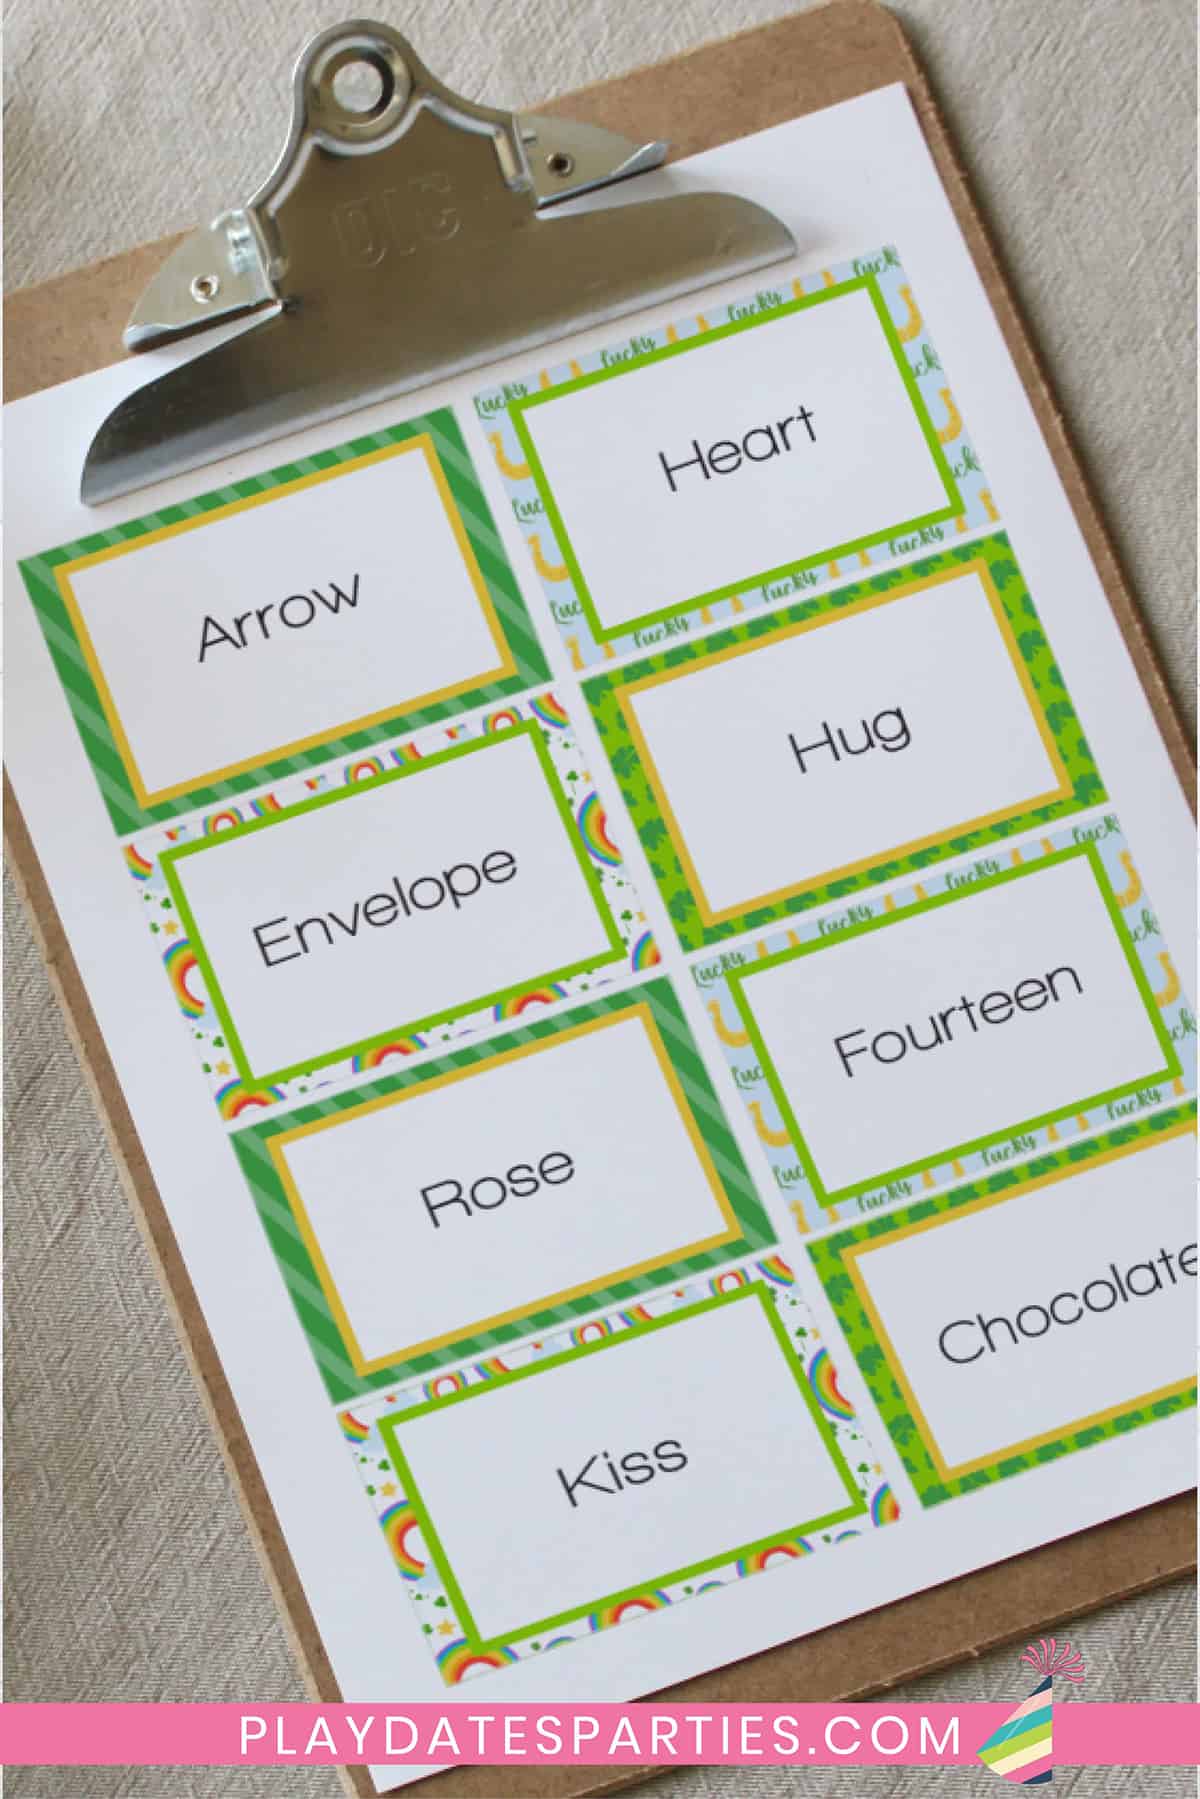 Printable St. Patrick's Day Charades Cards